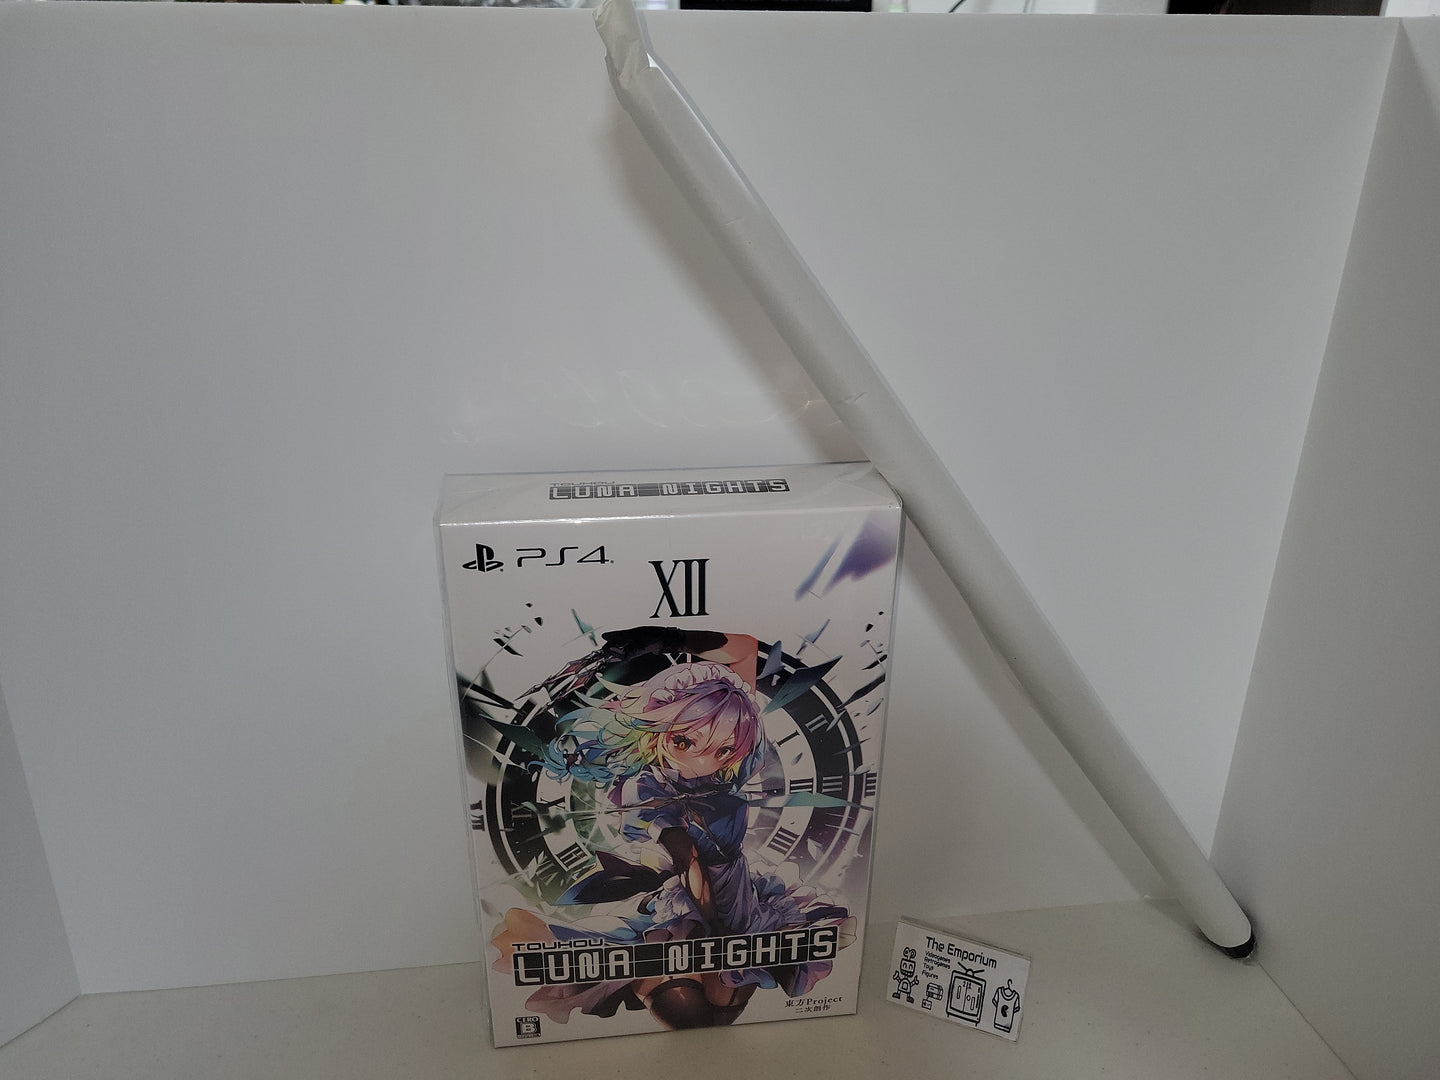 Touhou Luna Nights Limited Edition (SM) with Tapestry Poster - Sony PS4 Playstation 4